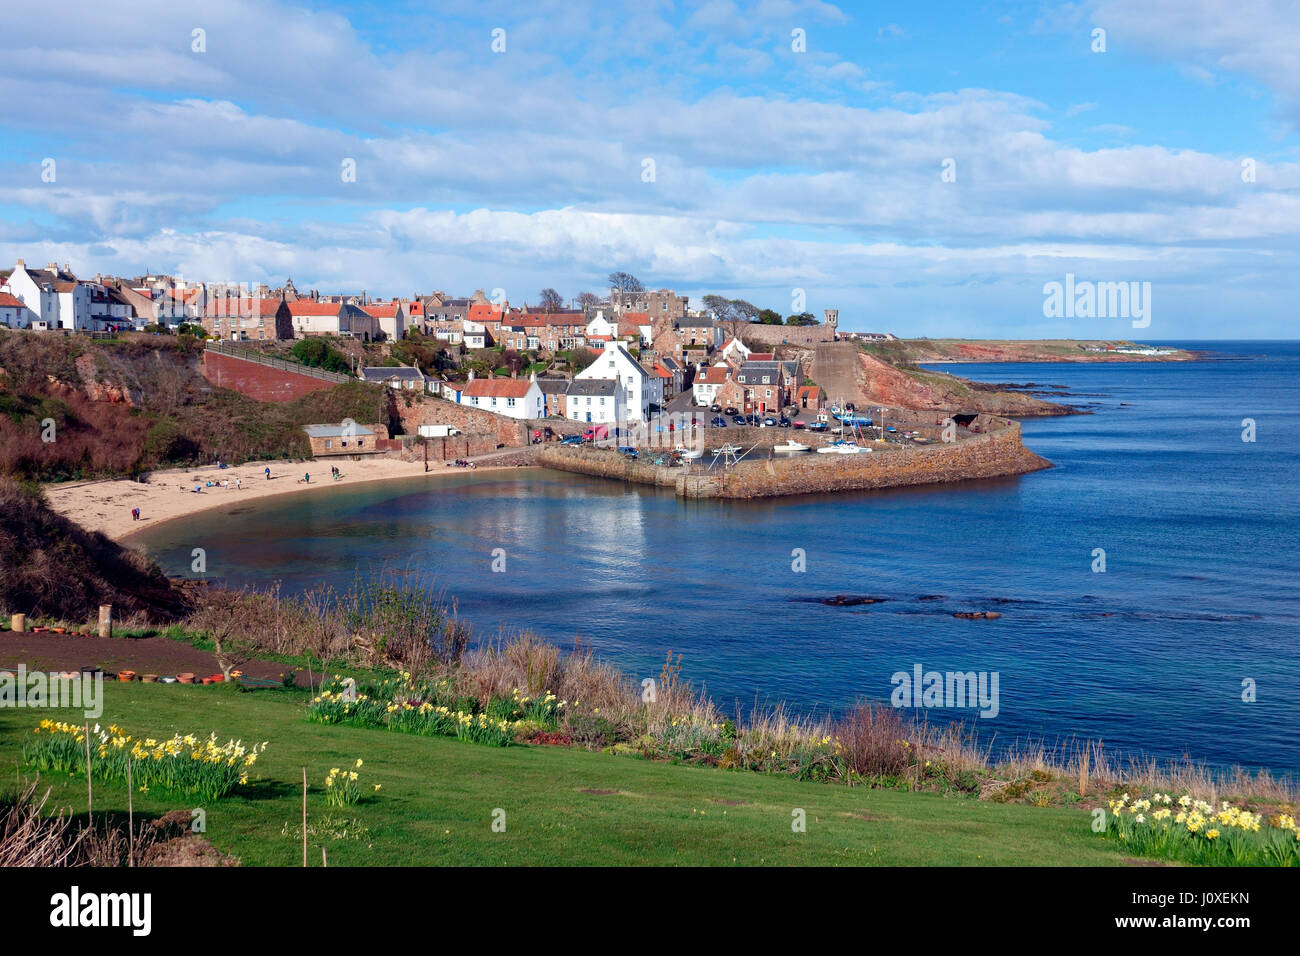 Crail harbour and town, once a Royal Burgh of Fife, Scotland with it's distinctive pantile roofs and vernacular architecture Stock Photo